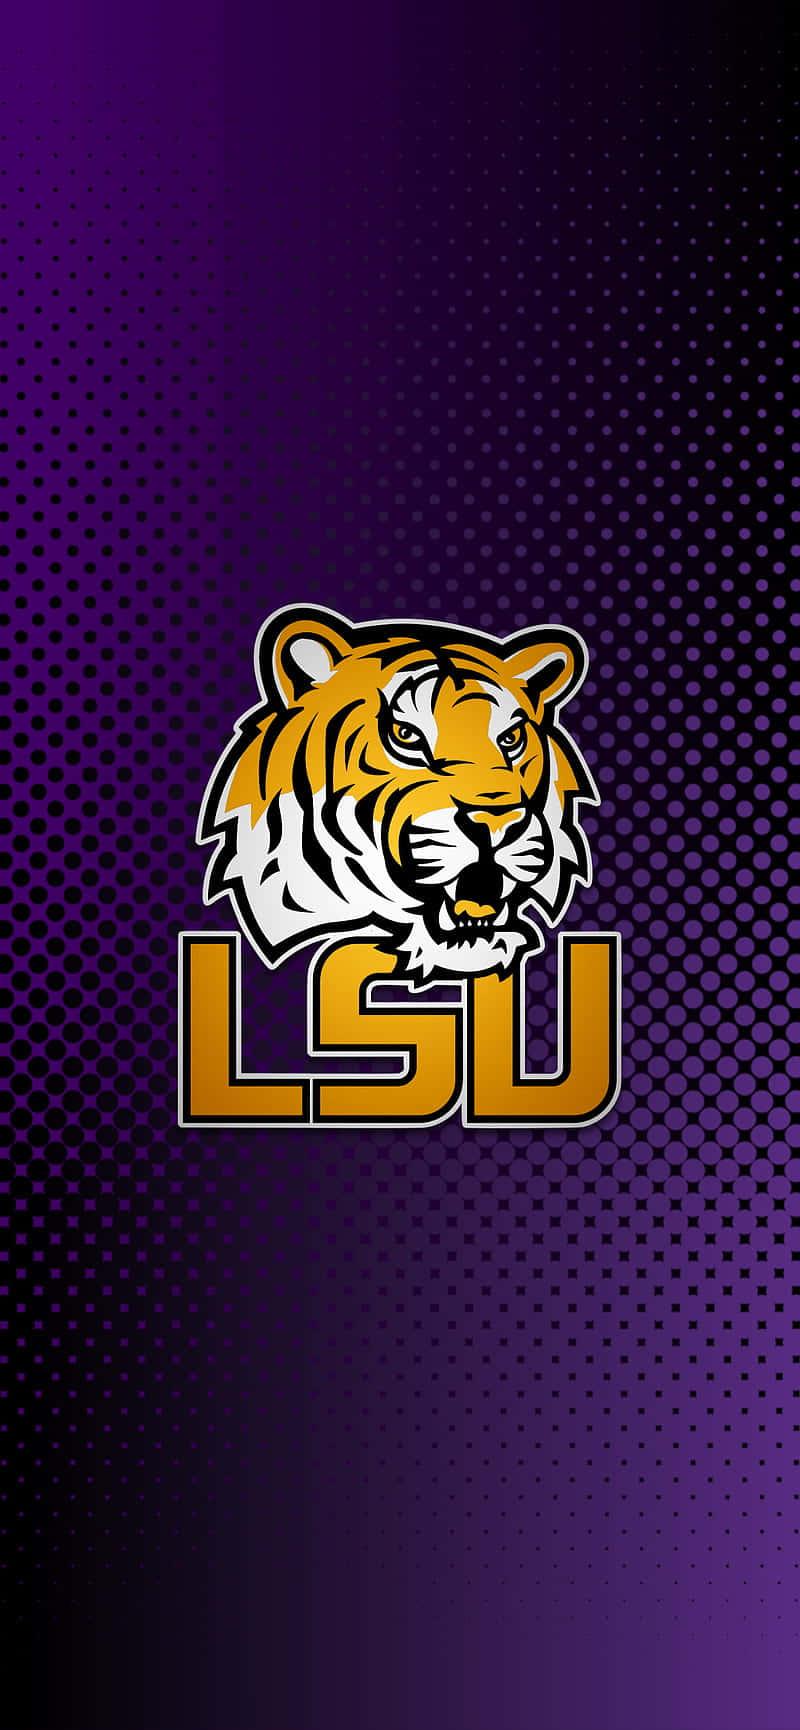 Get The Lsu Sports News On Your iPhone Wallpaper